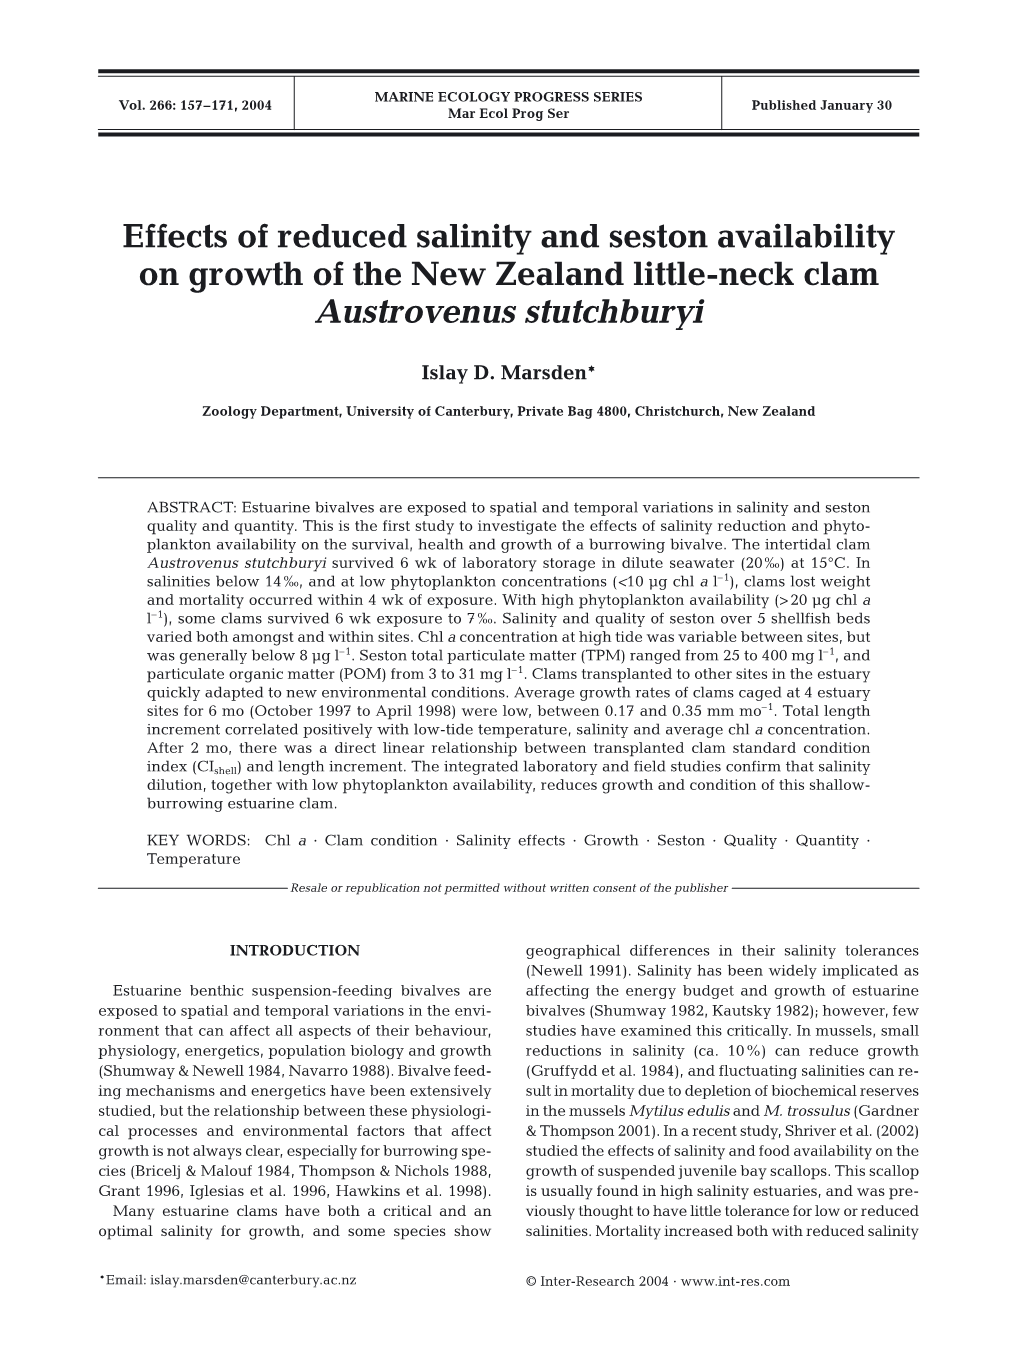 Effects of Reduced Salinity and Seston Availability on Growth of the New Zealand Little-Neck Clam Austrovenus Stutchburyi